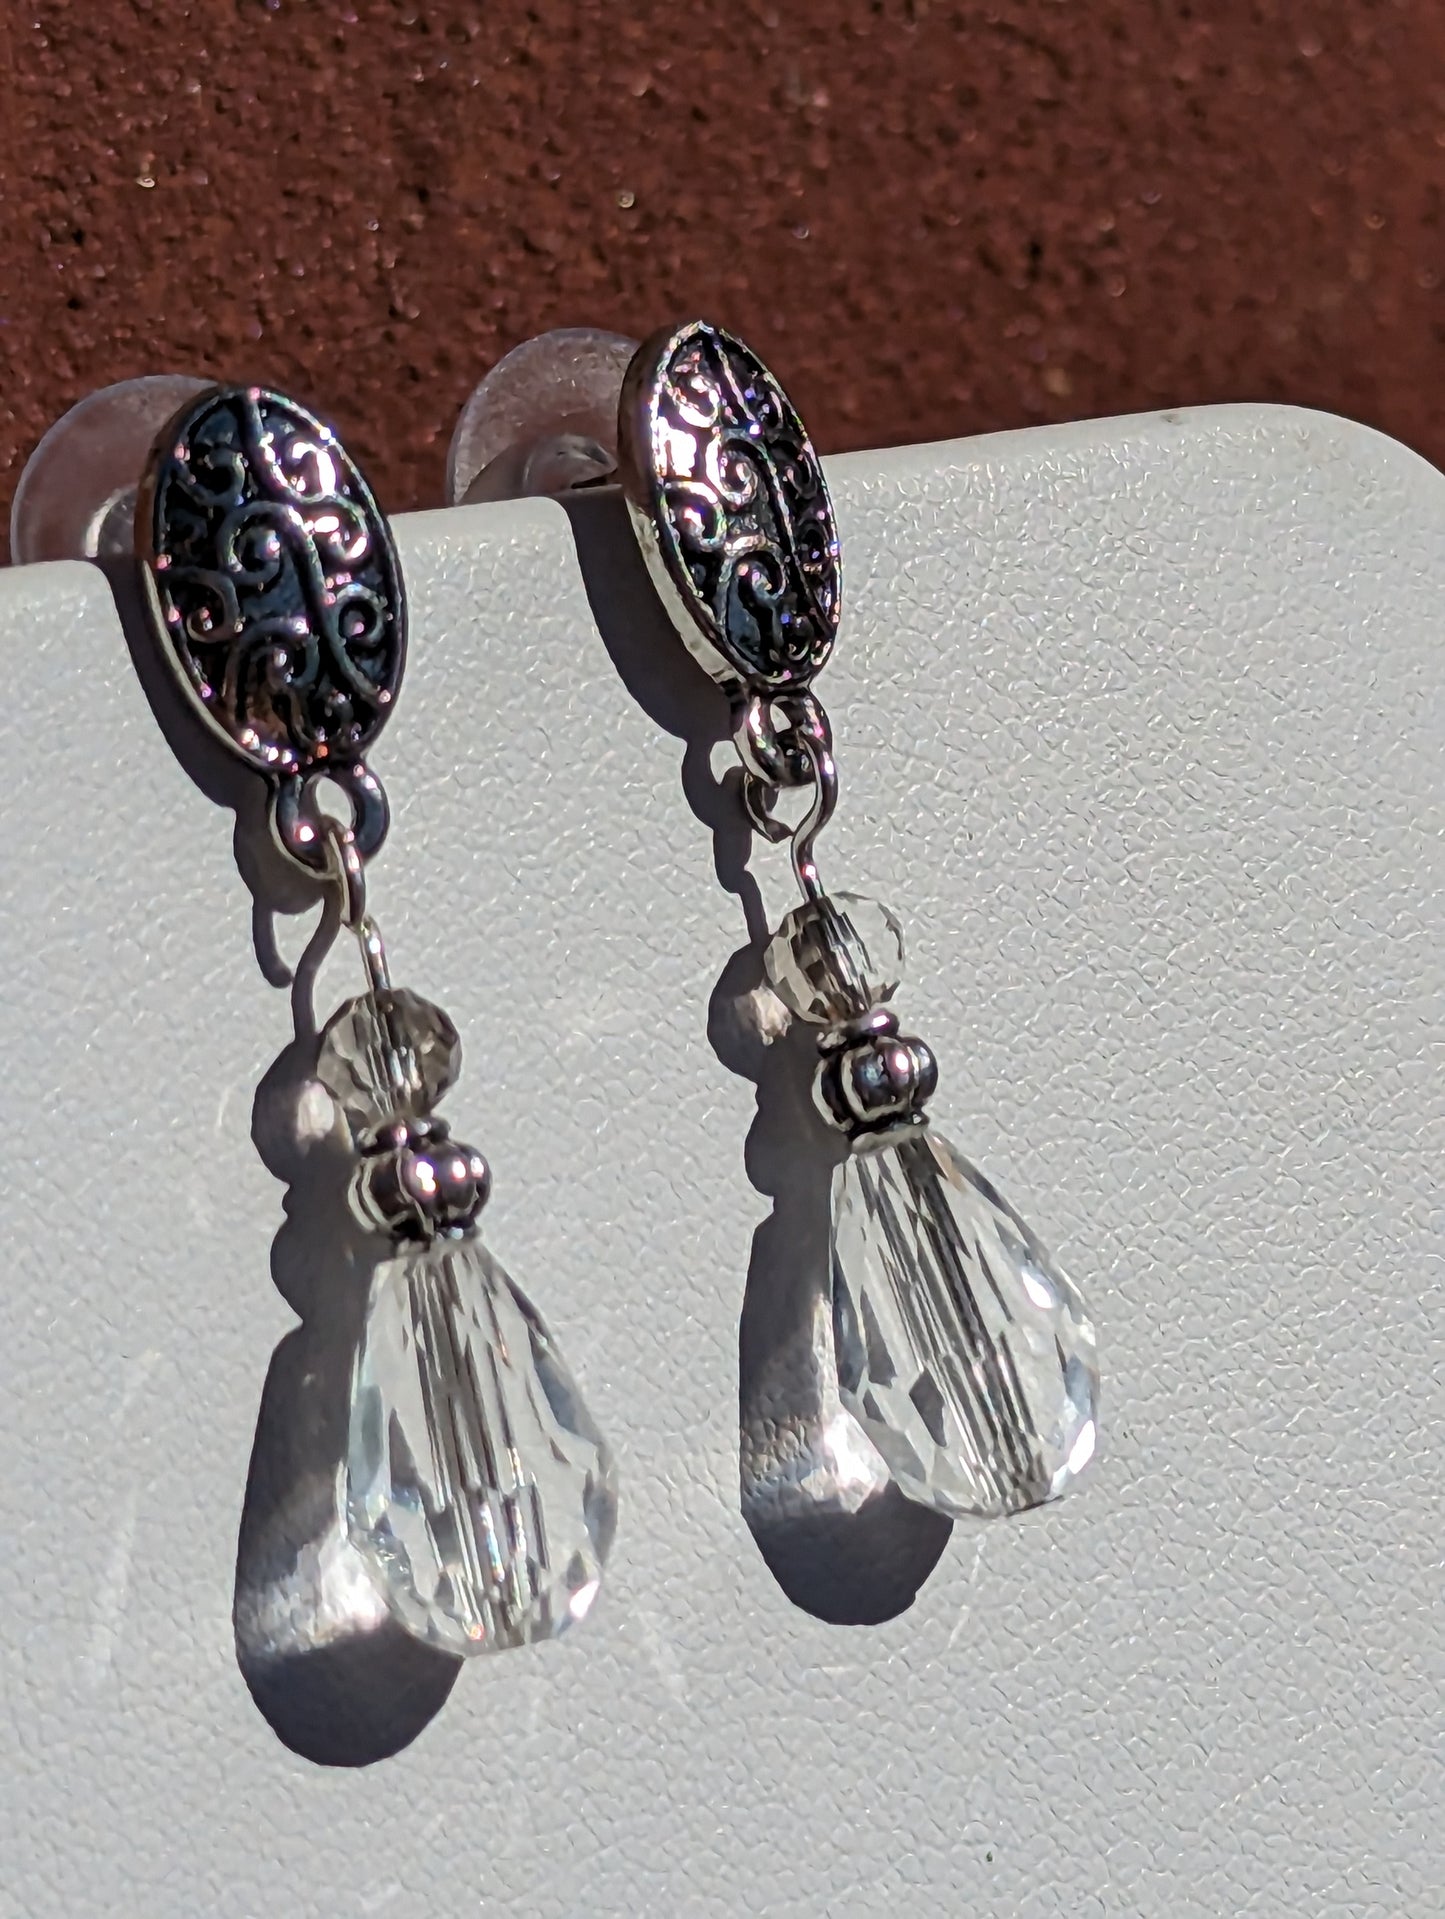 Clear Lead Crystal Pear-shaped Earrings on Antique Silver-toned Studs